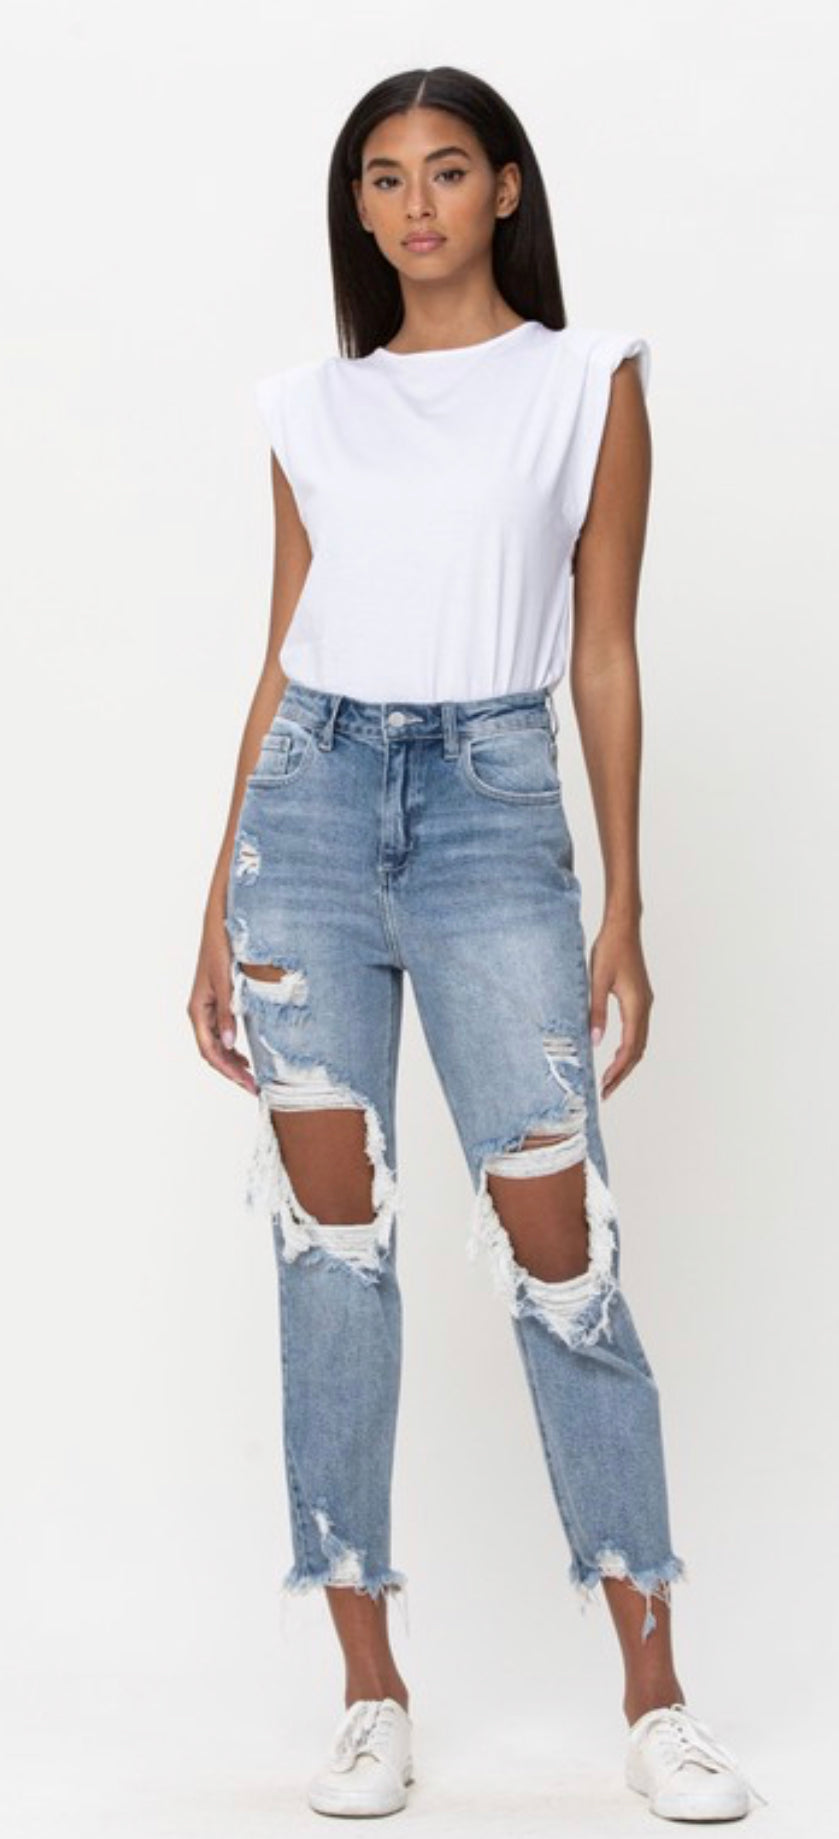 Caught In The Feelings High Rise Cropped Jeans